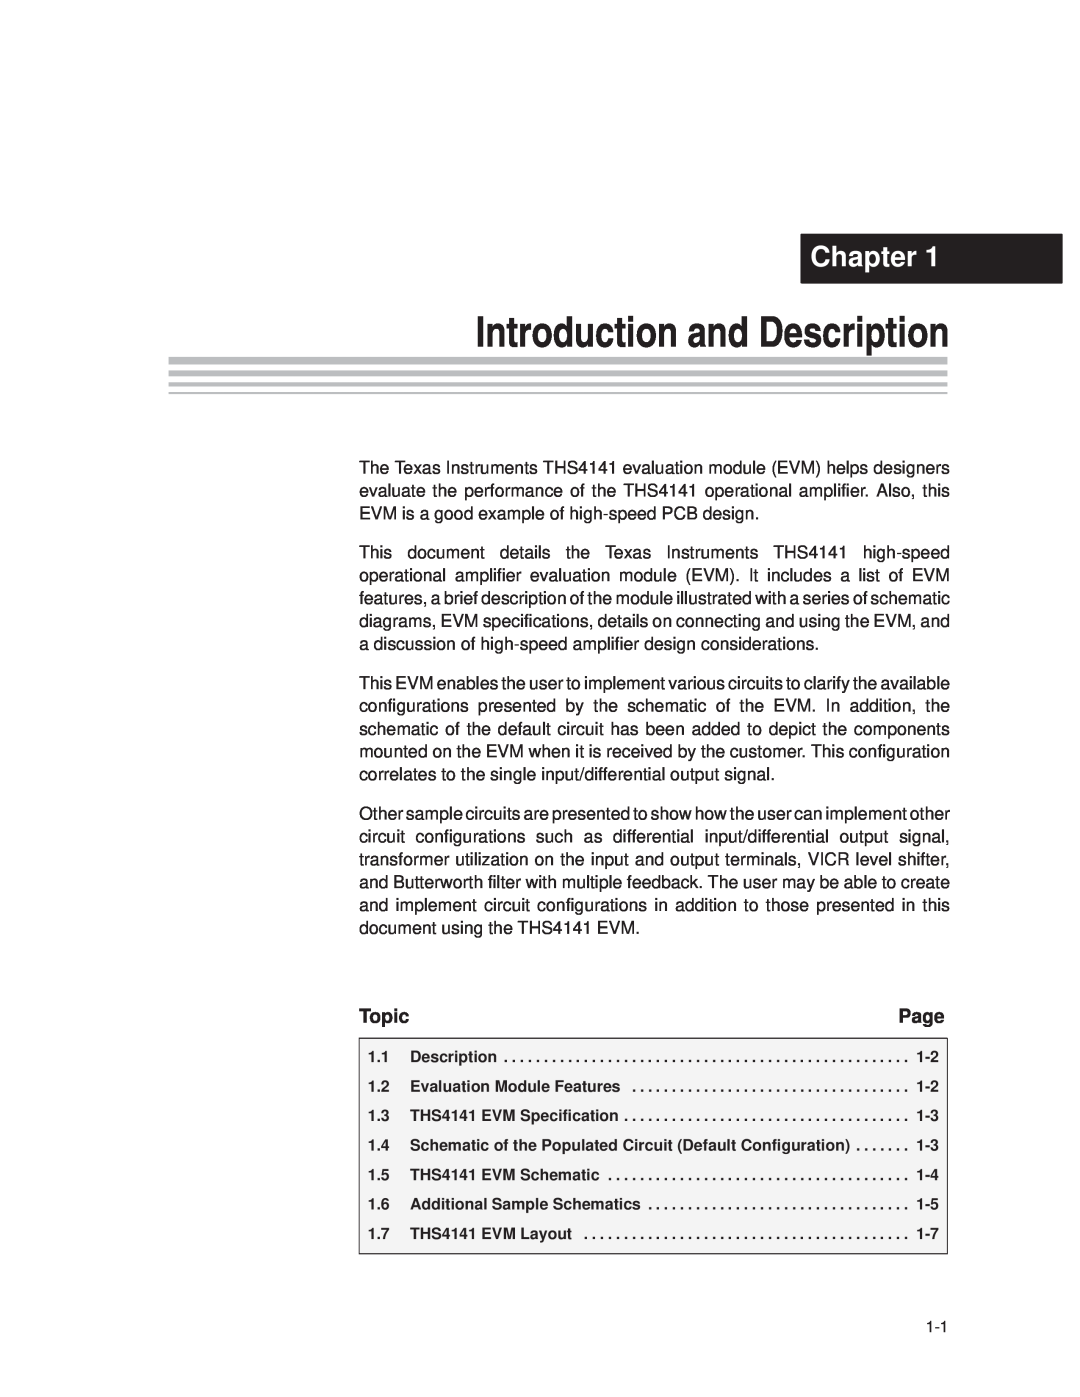 Texas Instruments THS4141 manual Introduction and Description, Chapter, Page, Topic 